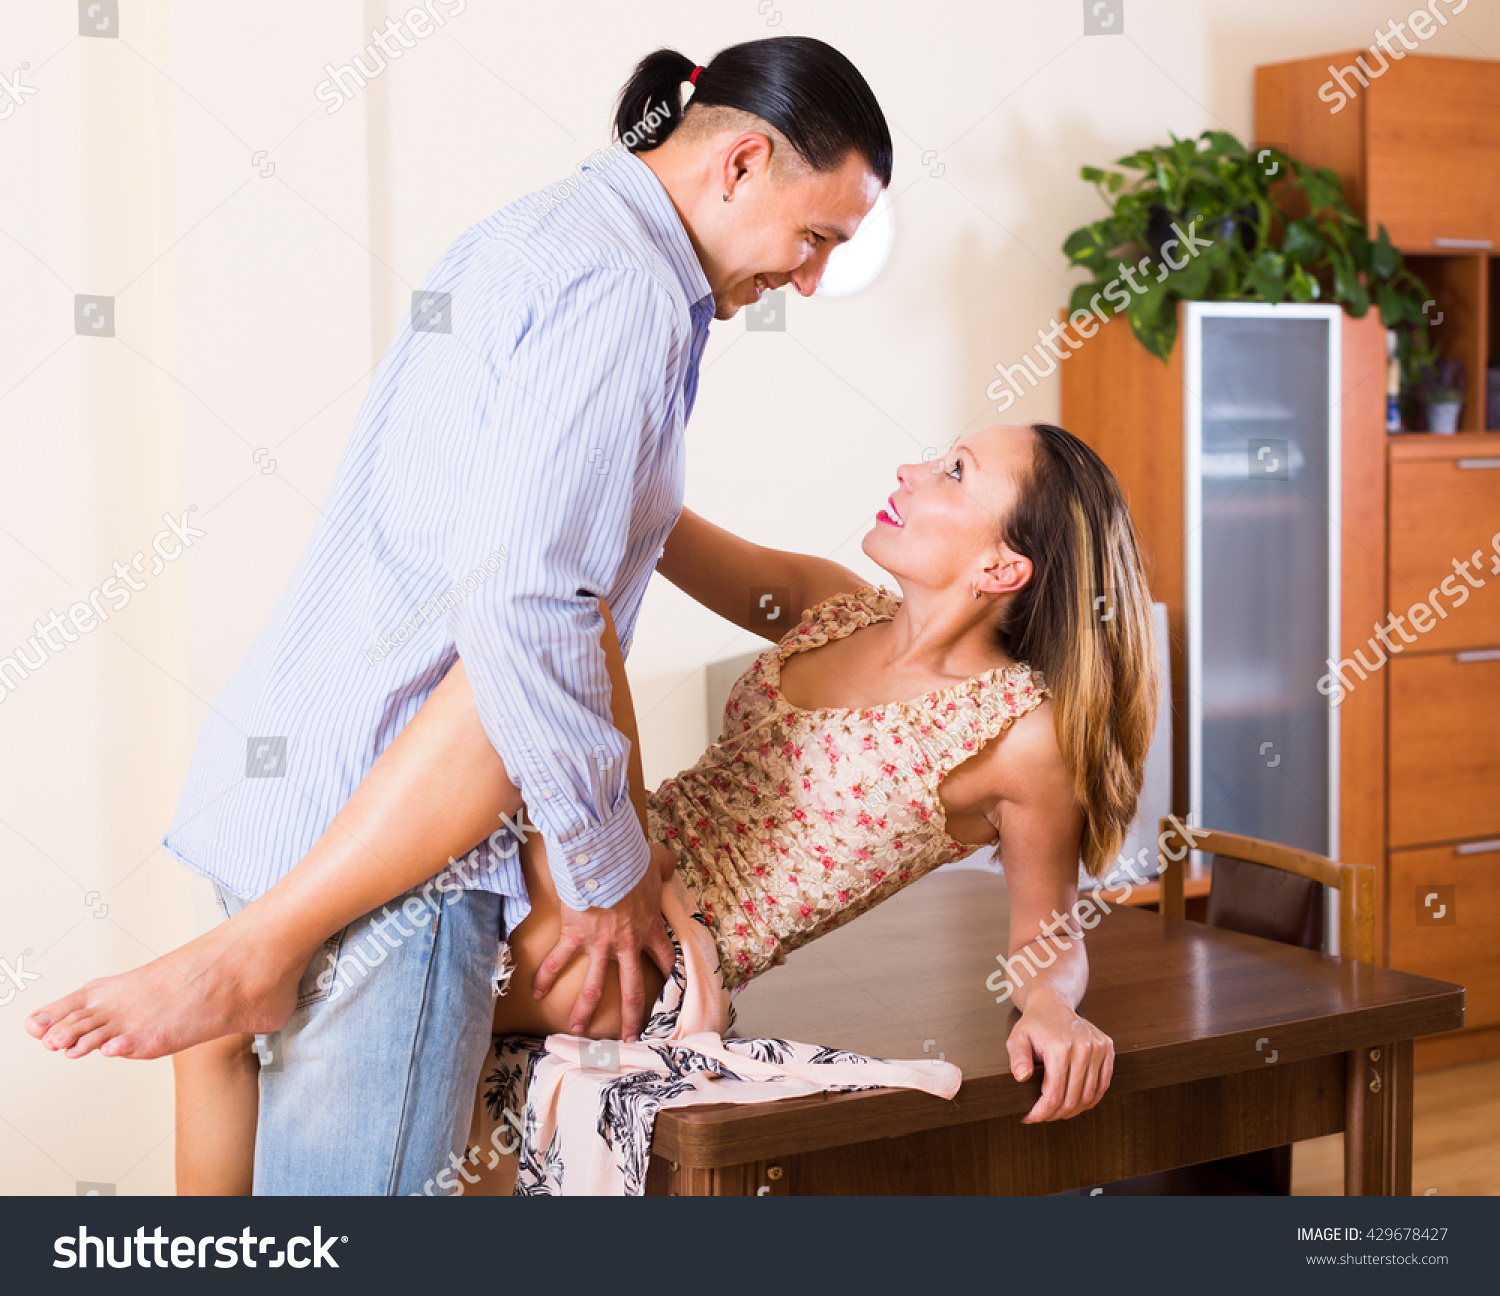 Having Sex On A Table 75